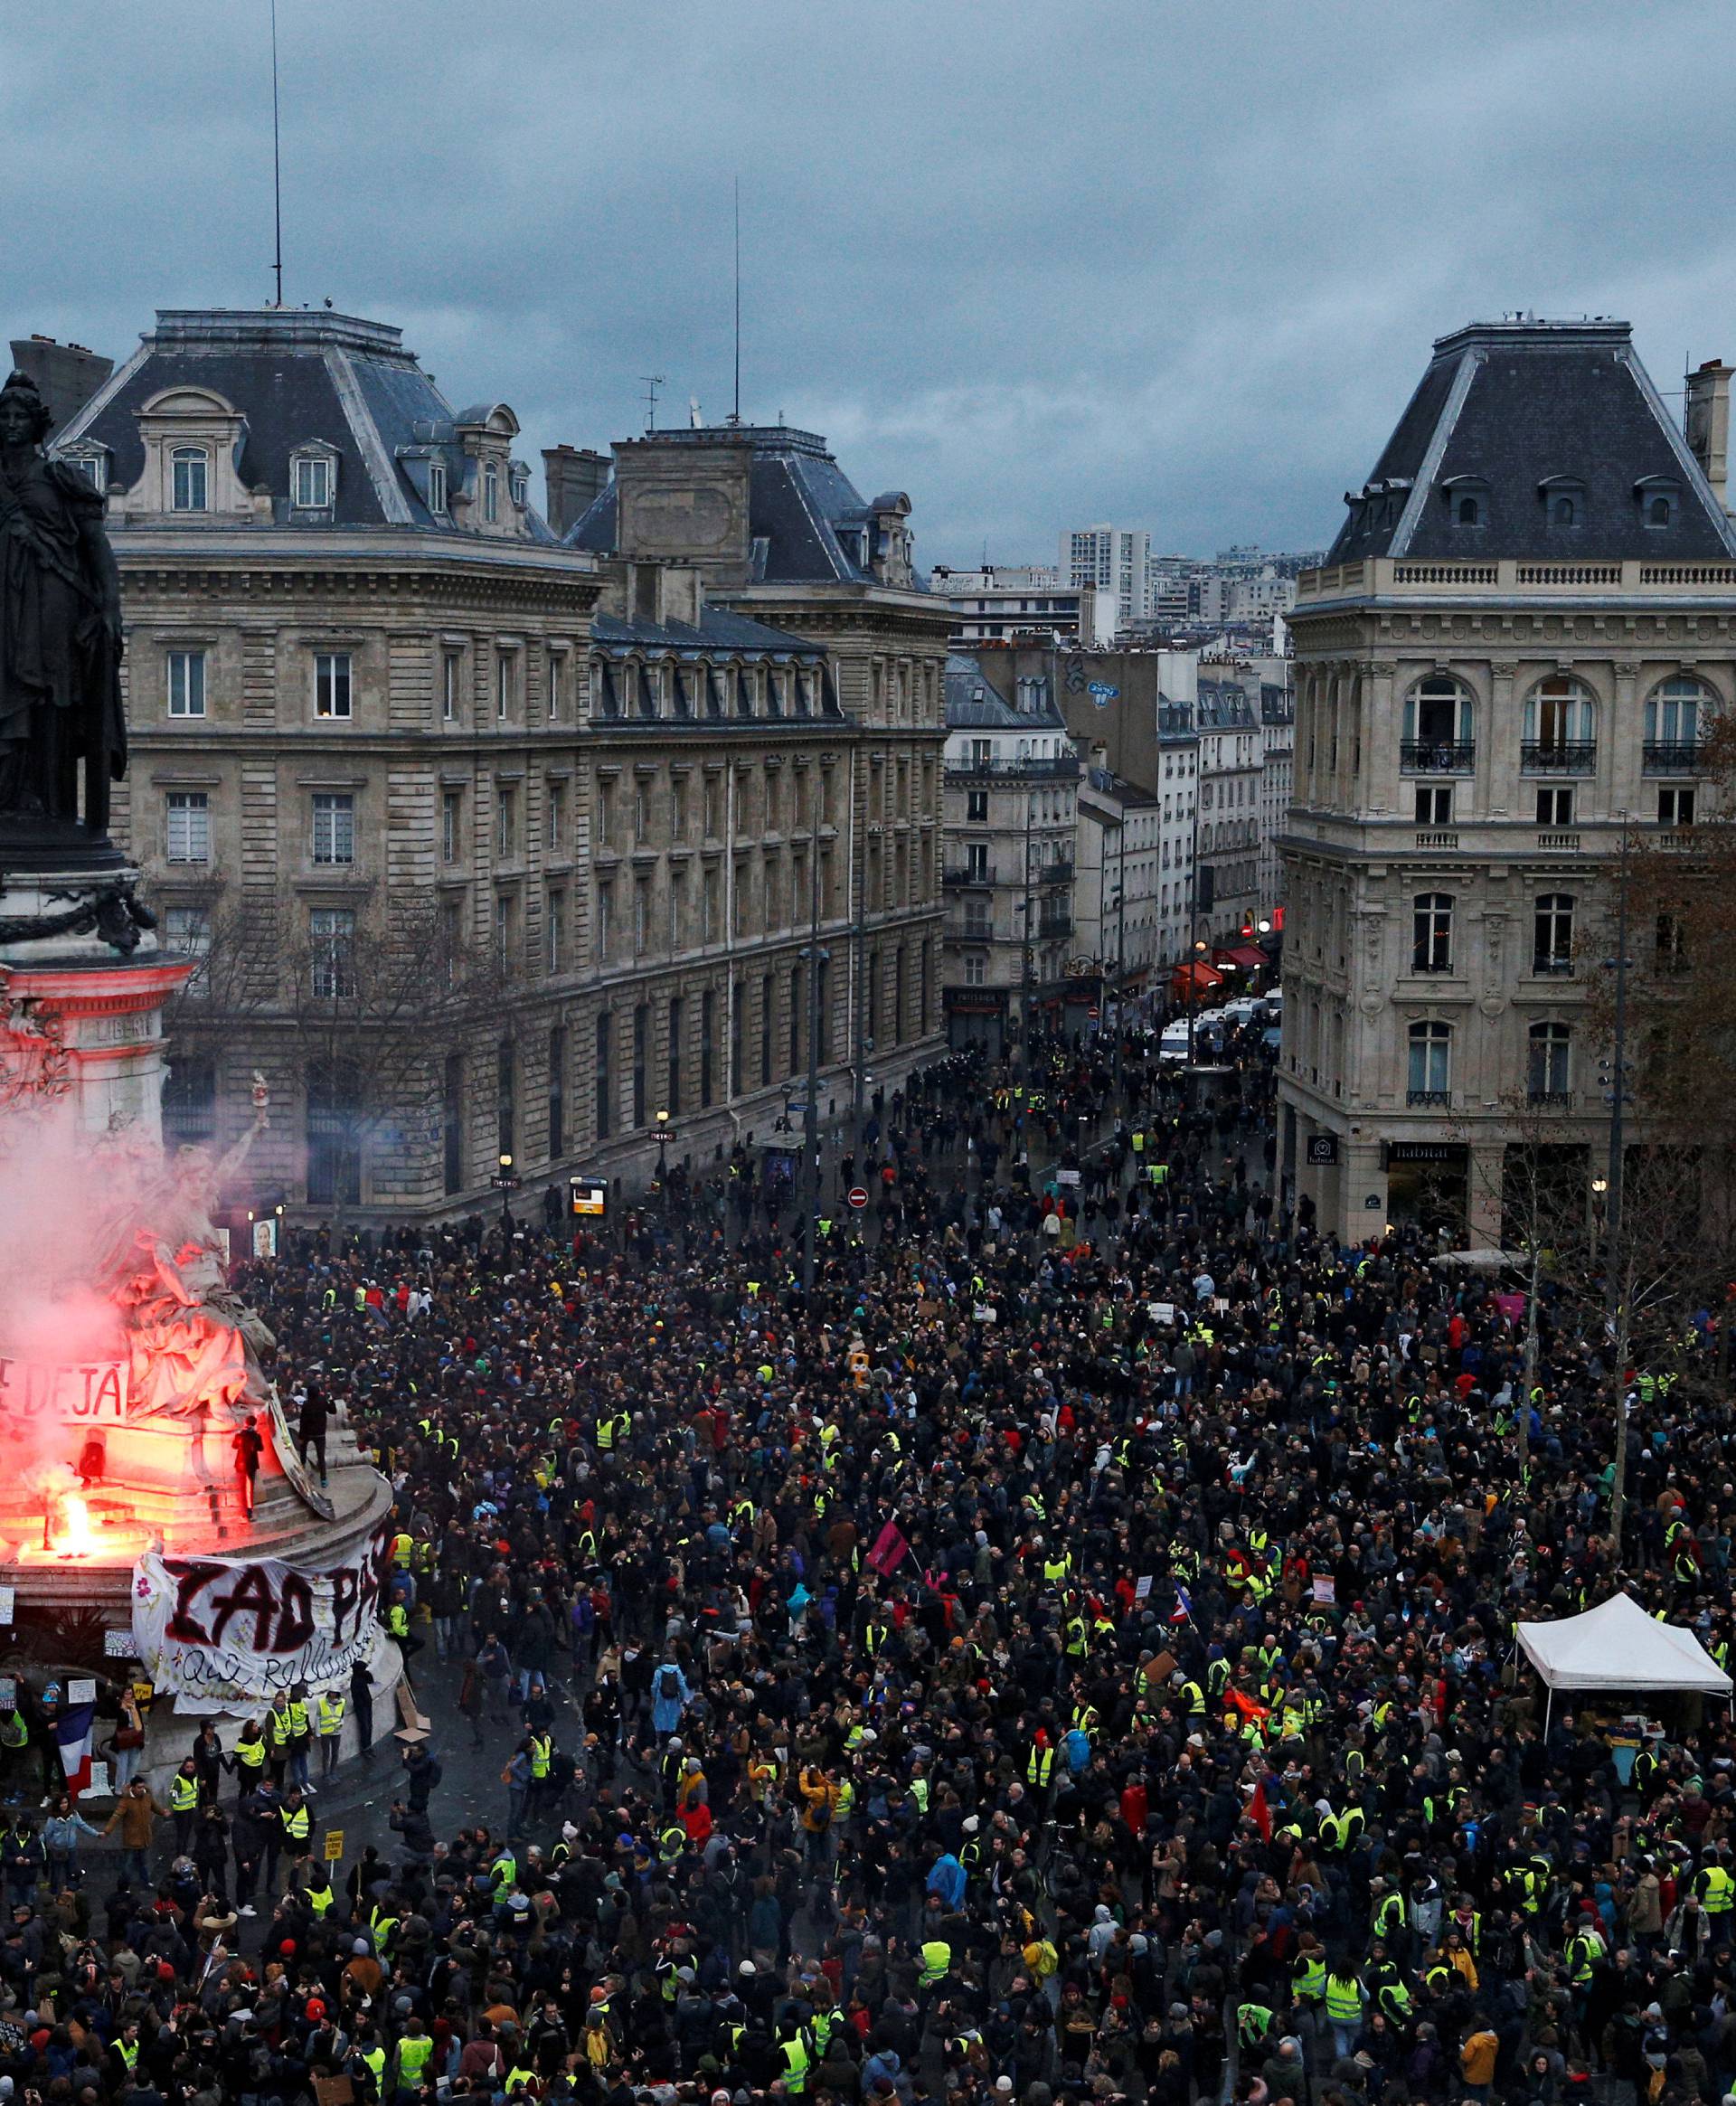 A view of the Place de la Republique as protesters wearing yellow vests gather during a national day of protest by the "yellow vests" movement in Paris